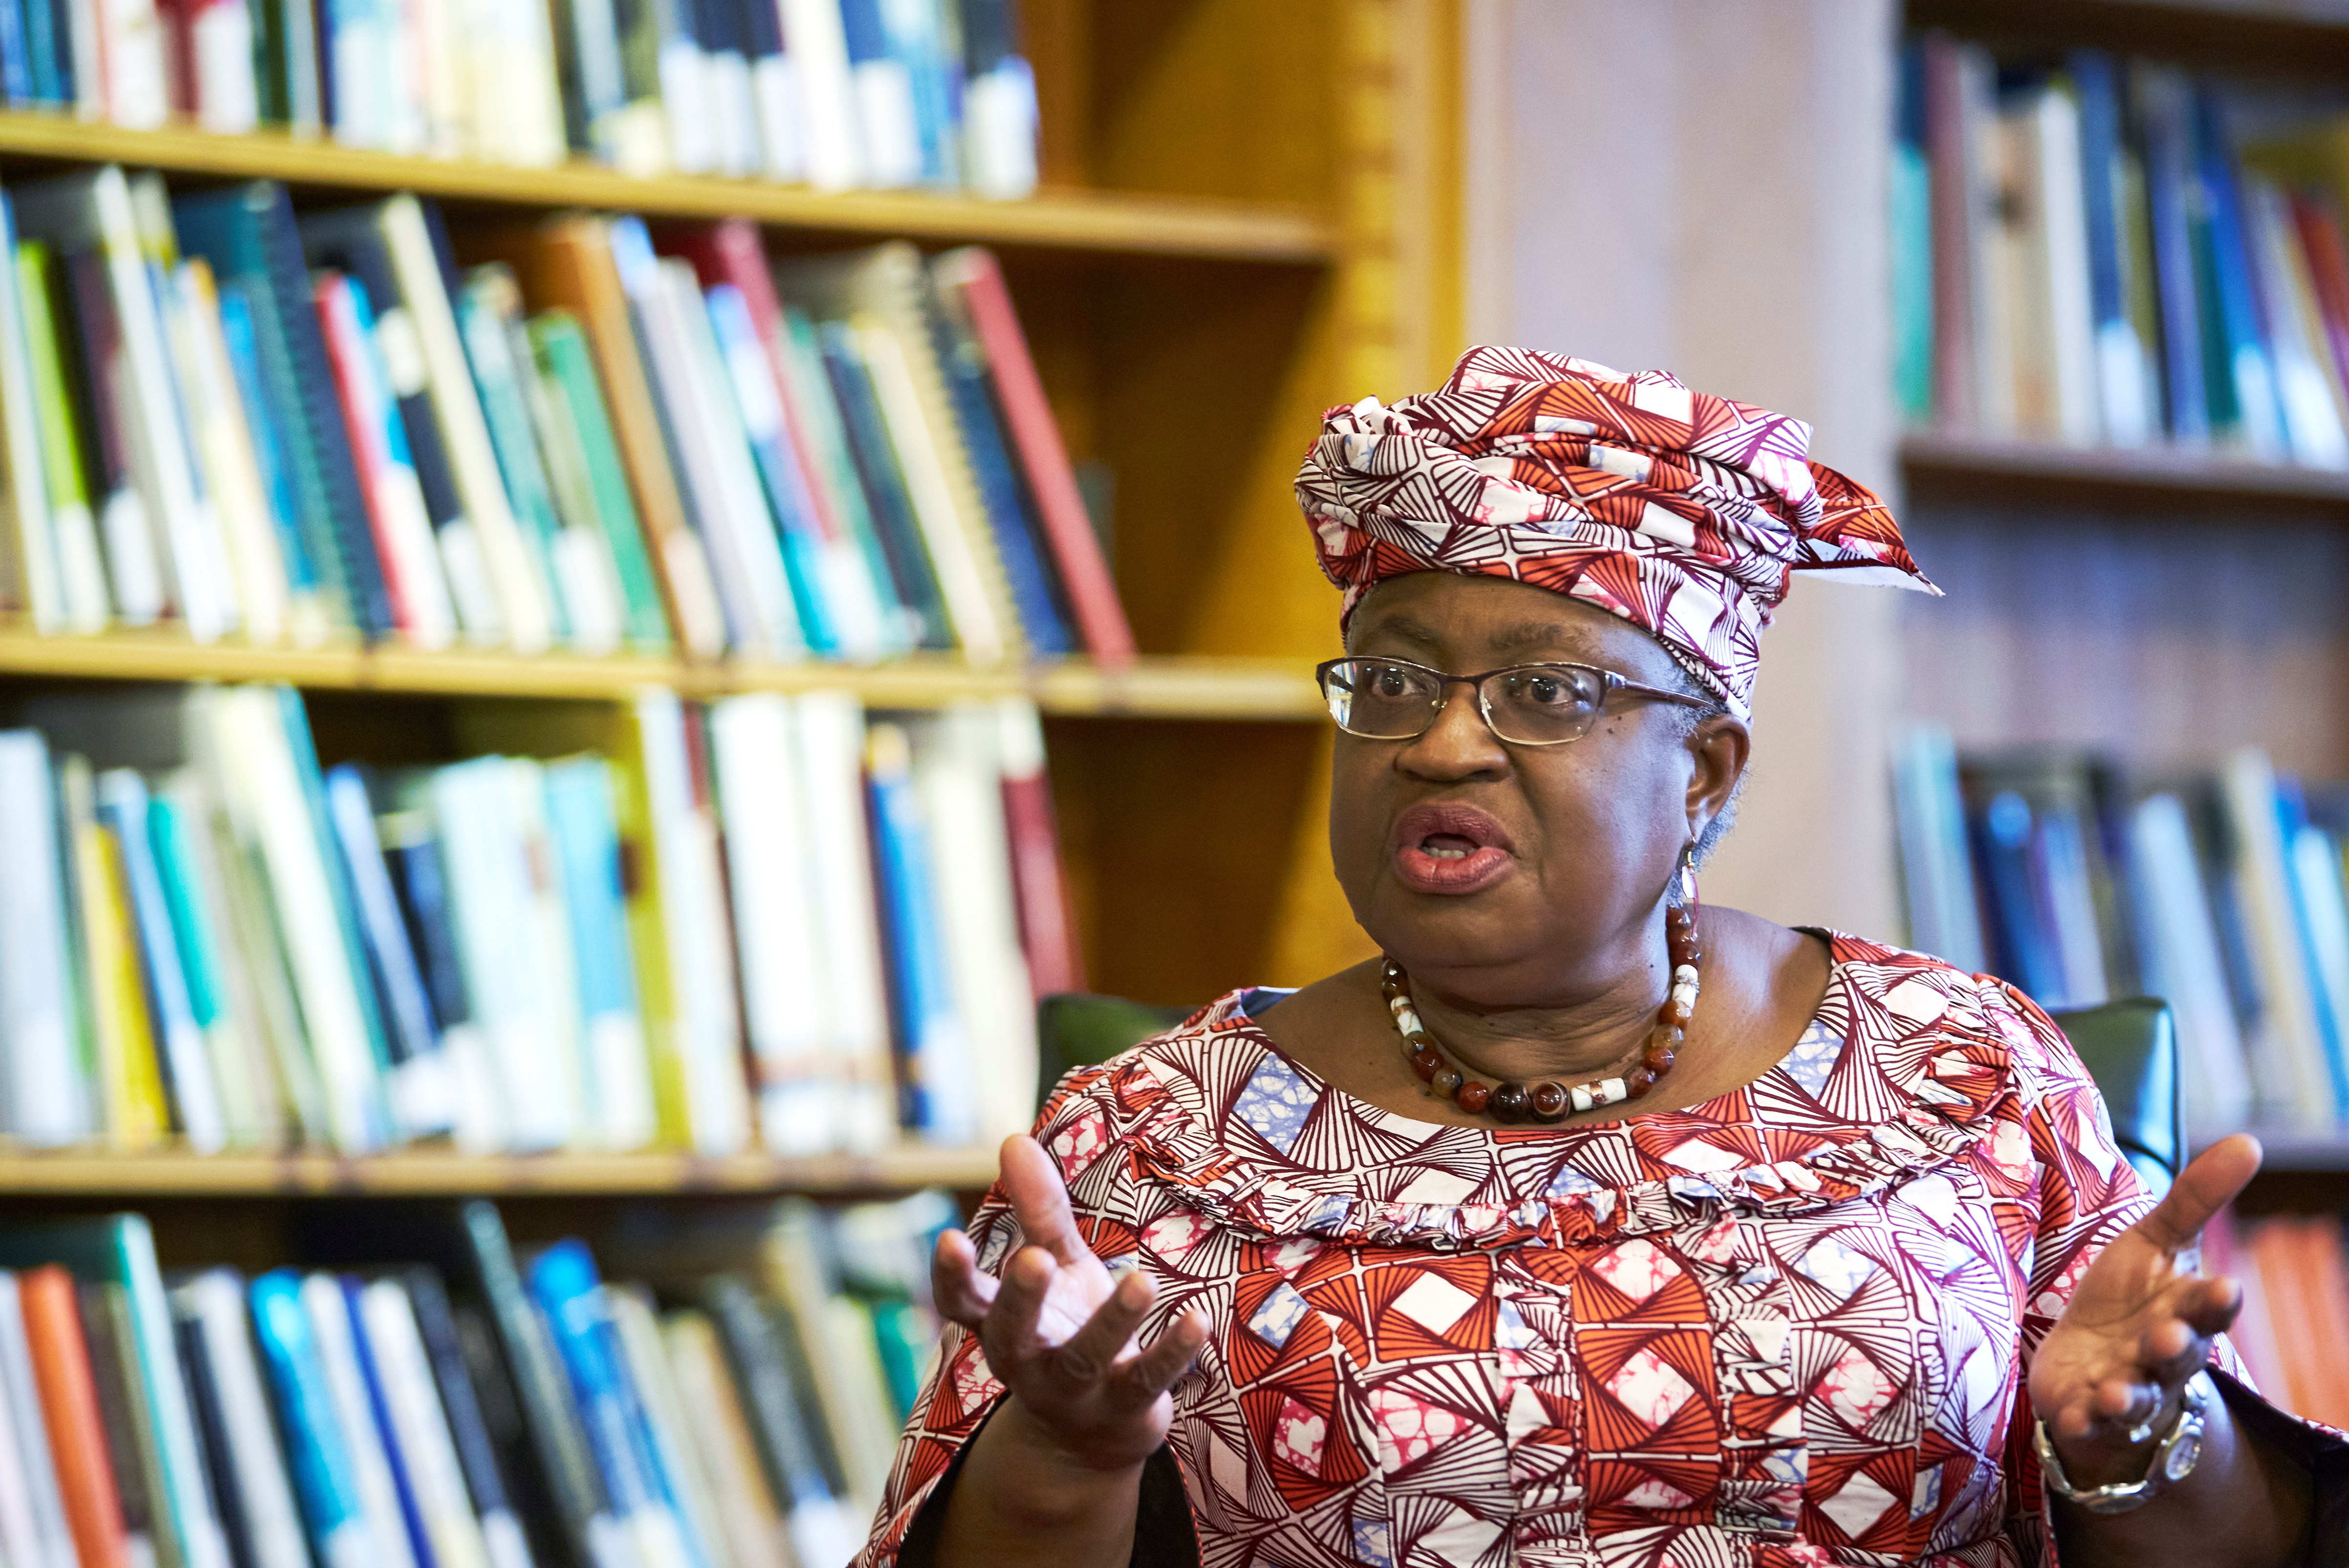 World Trade Organization (WTO) Director-General Ngozi Okonjo-Iweala speaks during an interview for Reuters Next, ahead of the 12th Ministerial Conference (MC12), in Geneva, Switzerland, November 25, 2021. Picture taken November 25, 2021. REUTERS/Denis Balibouse